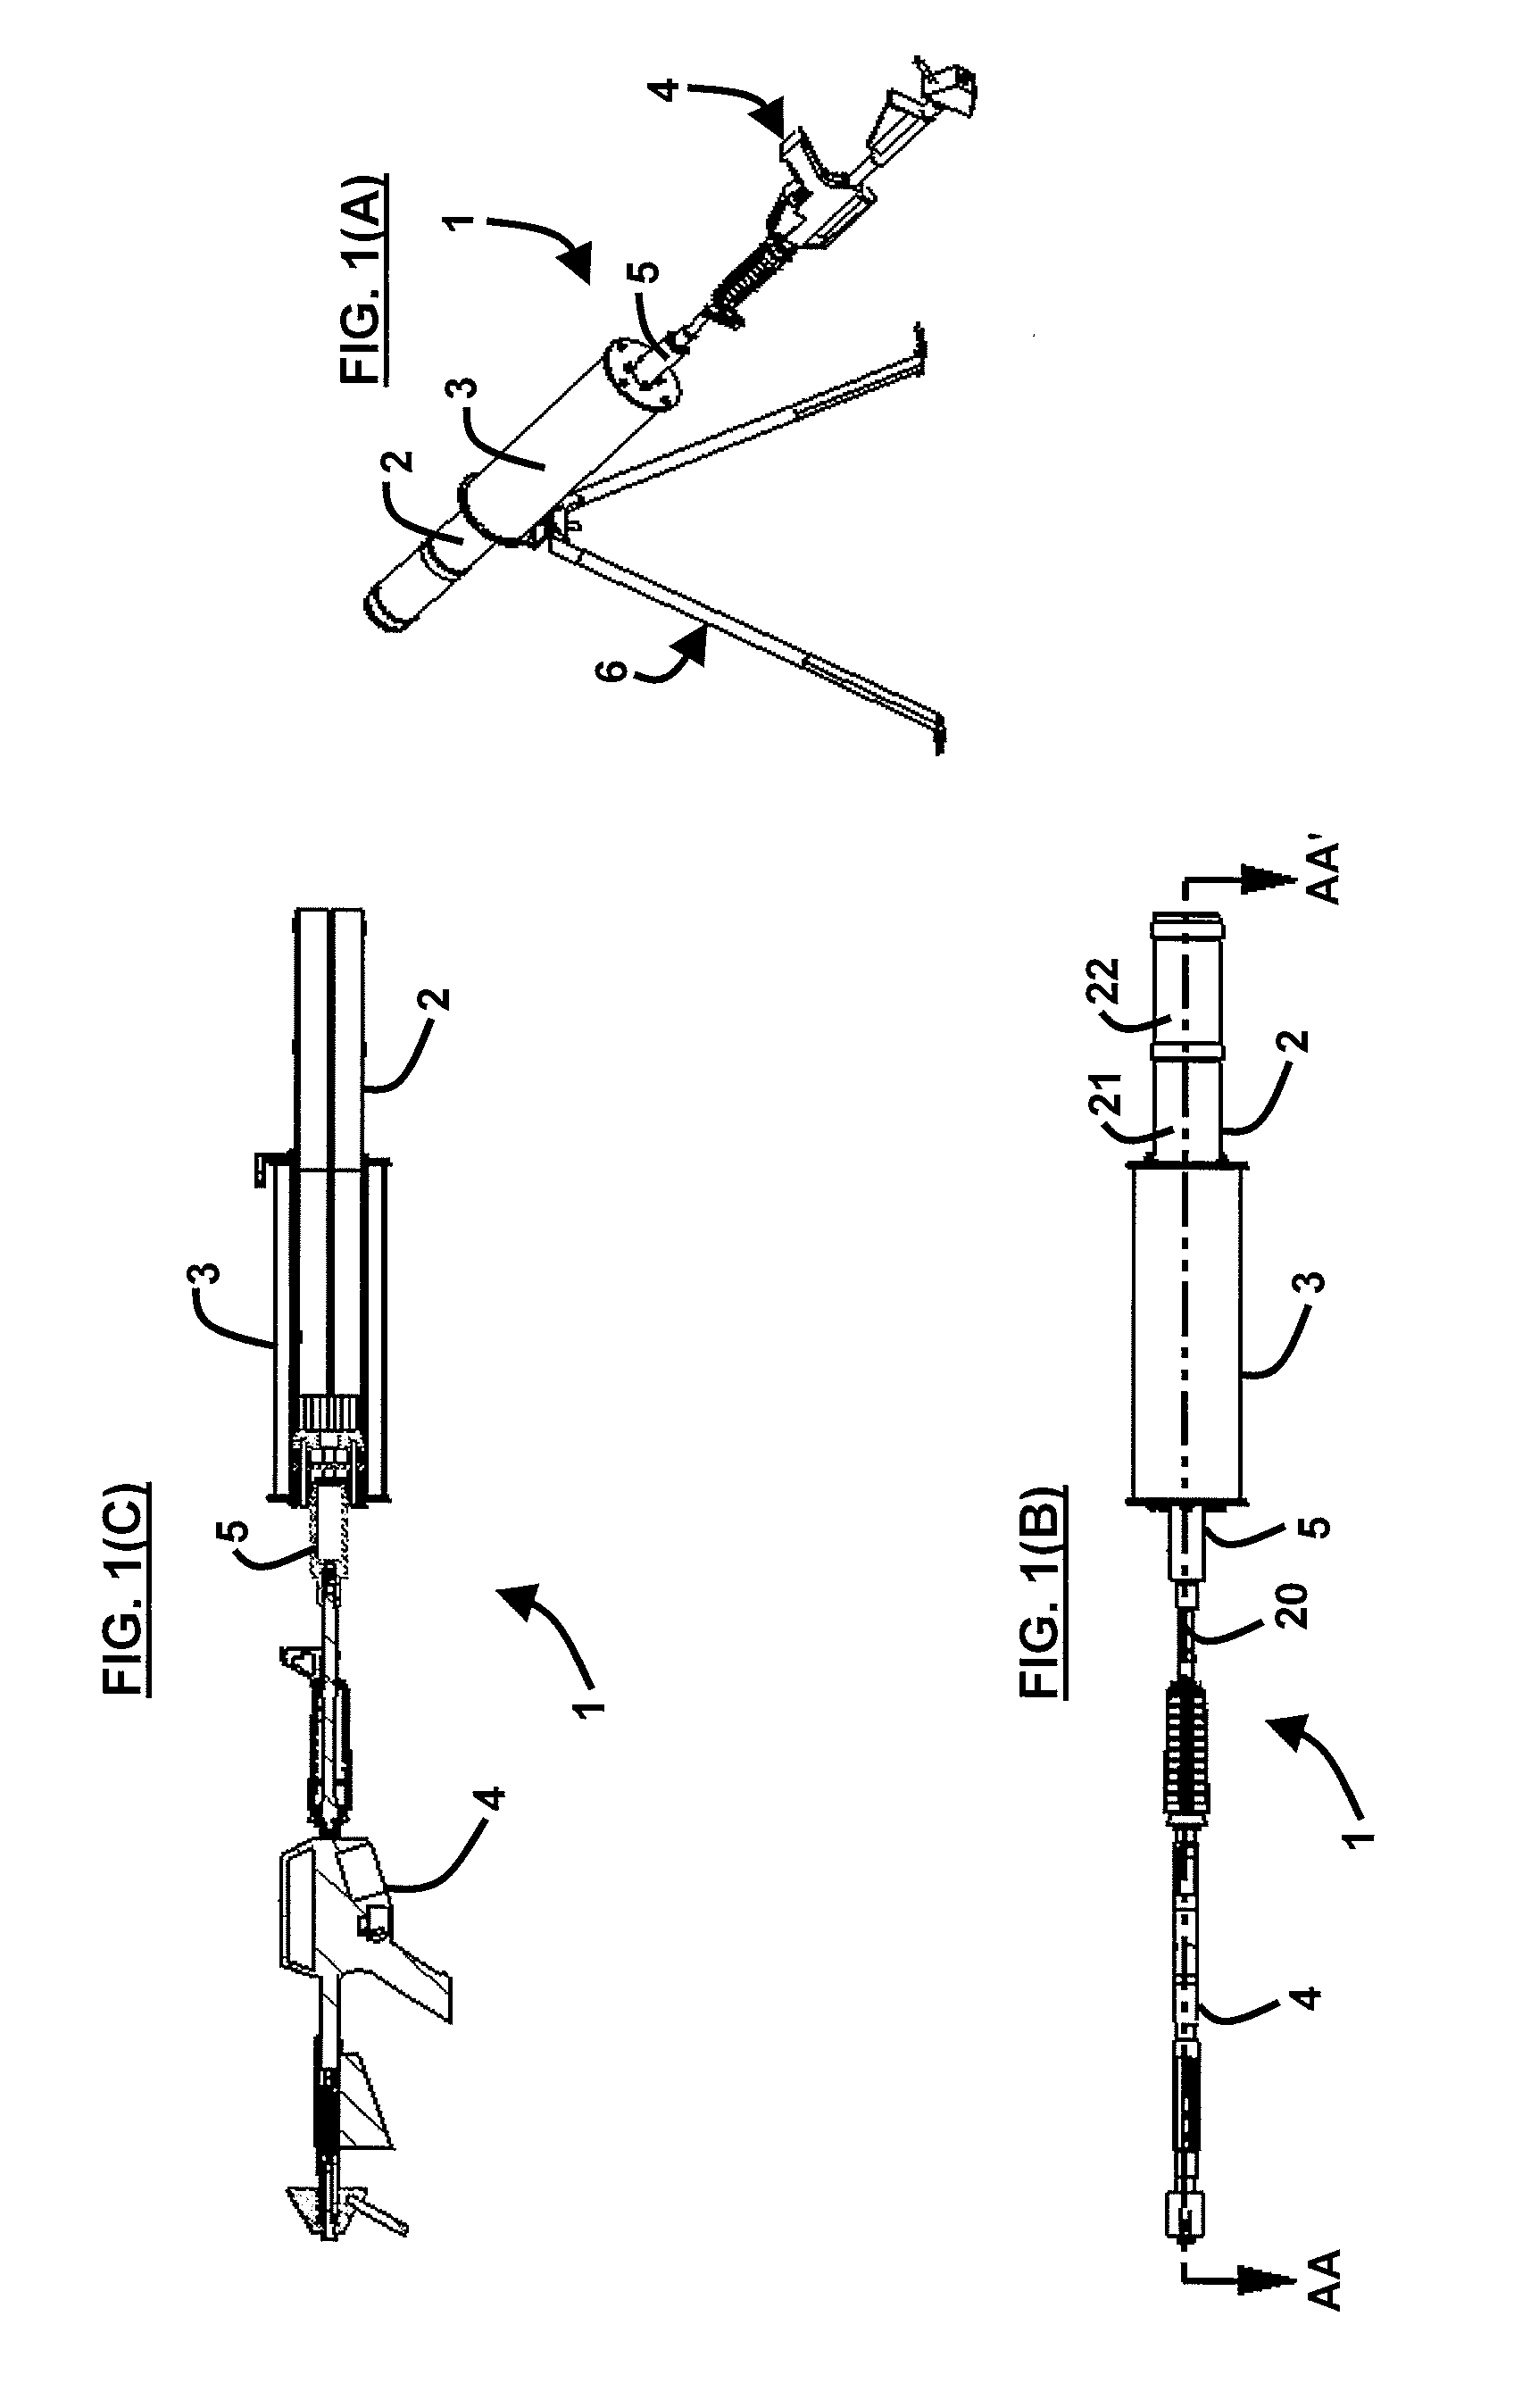 Rifle launcher for small unmanned aerial vehicles (UAVS)